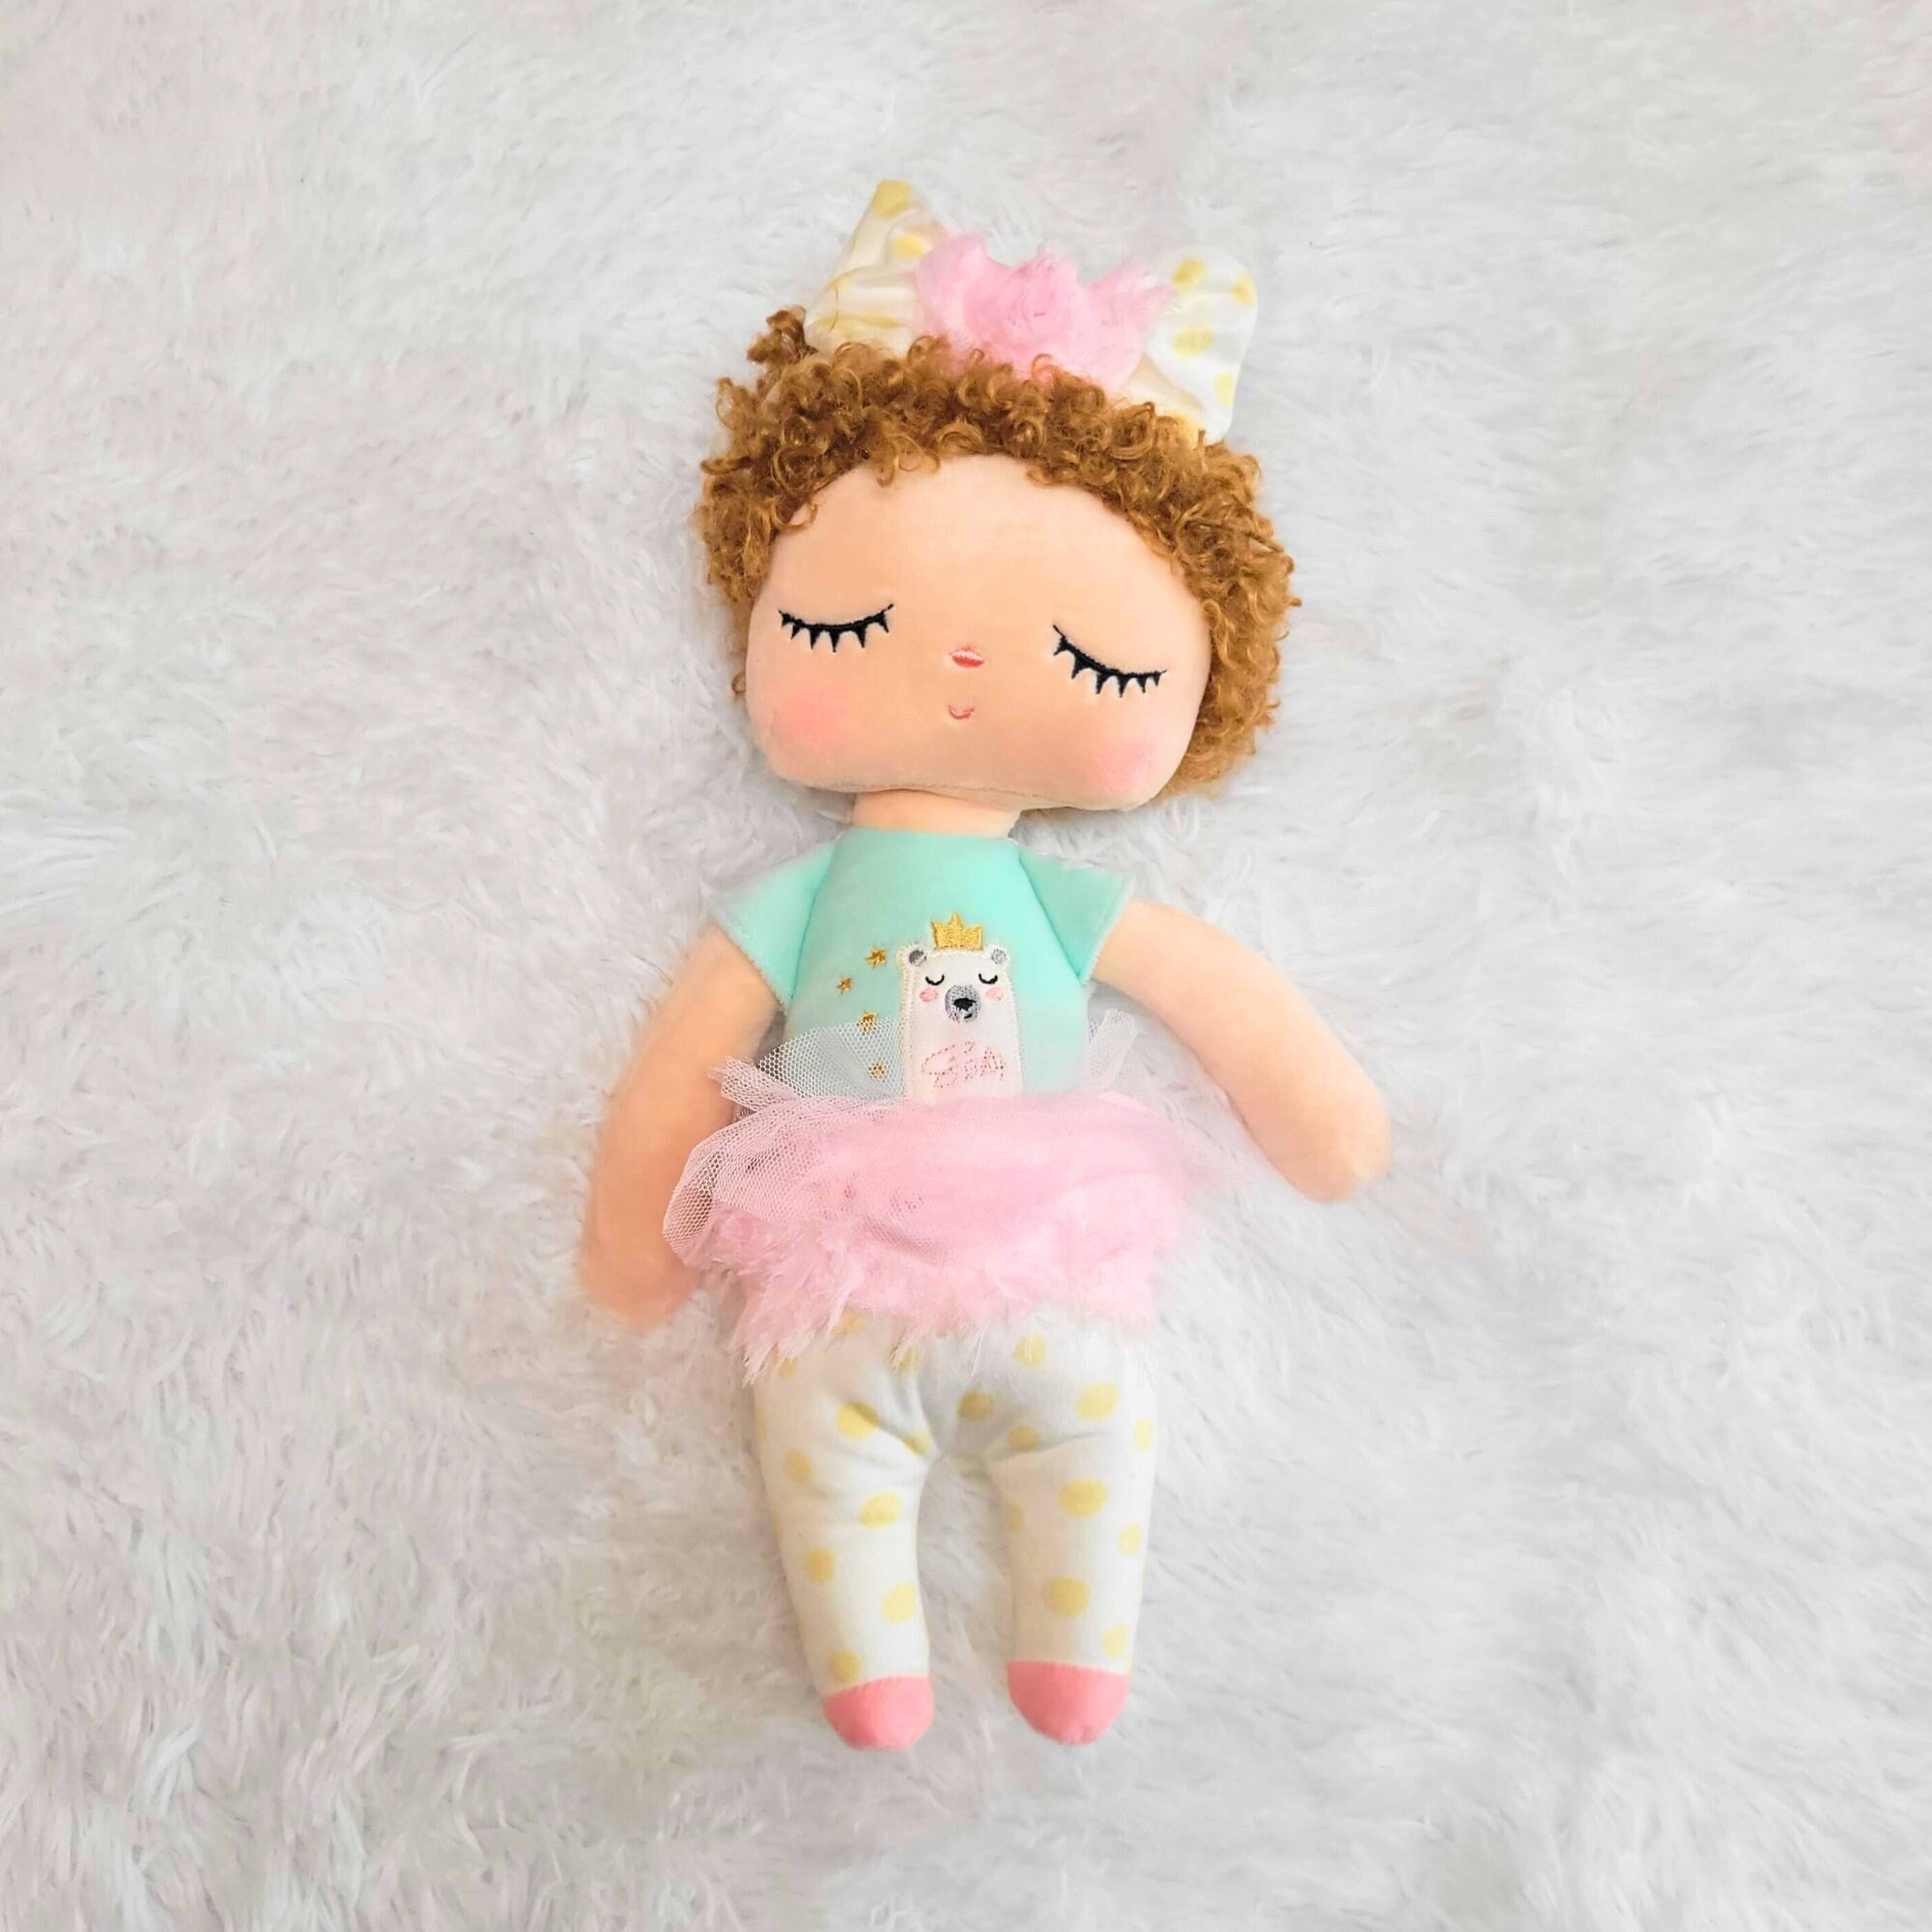 Curly Hair Baby Doll - Etsy